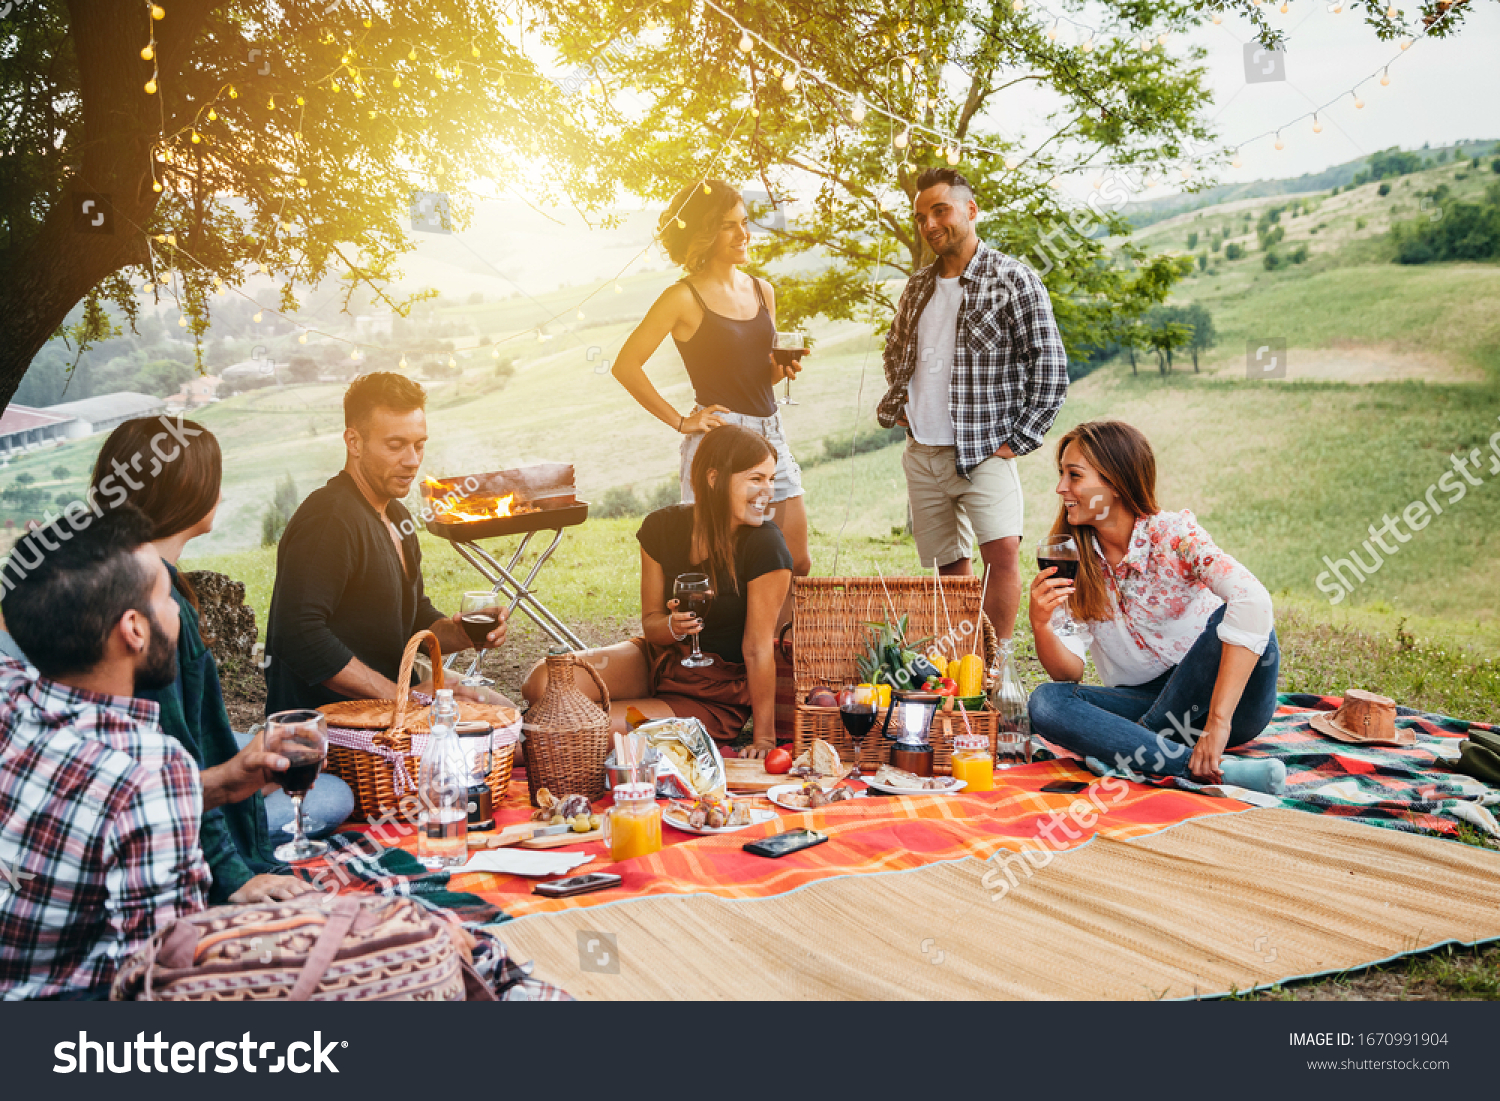 Picnic in the countryside. Group of young friends, at sunset on spring day are sitting on the ground in a park near trees. They drinking red wine and eating grilled meat with barbecue #1670991904